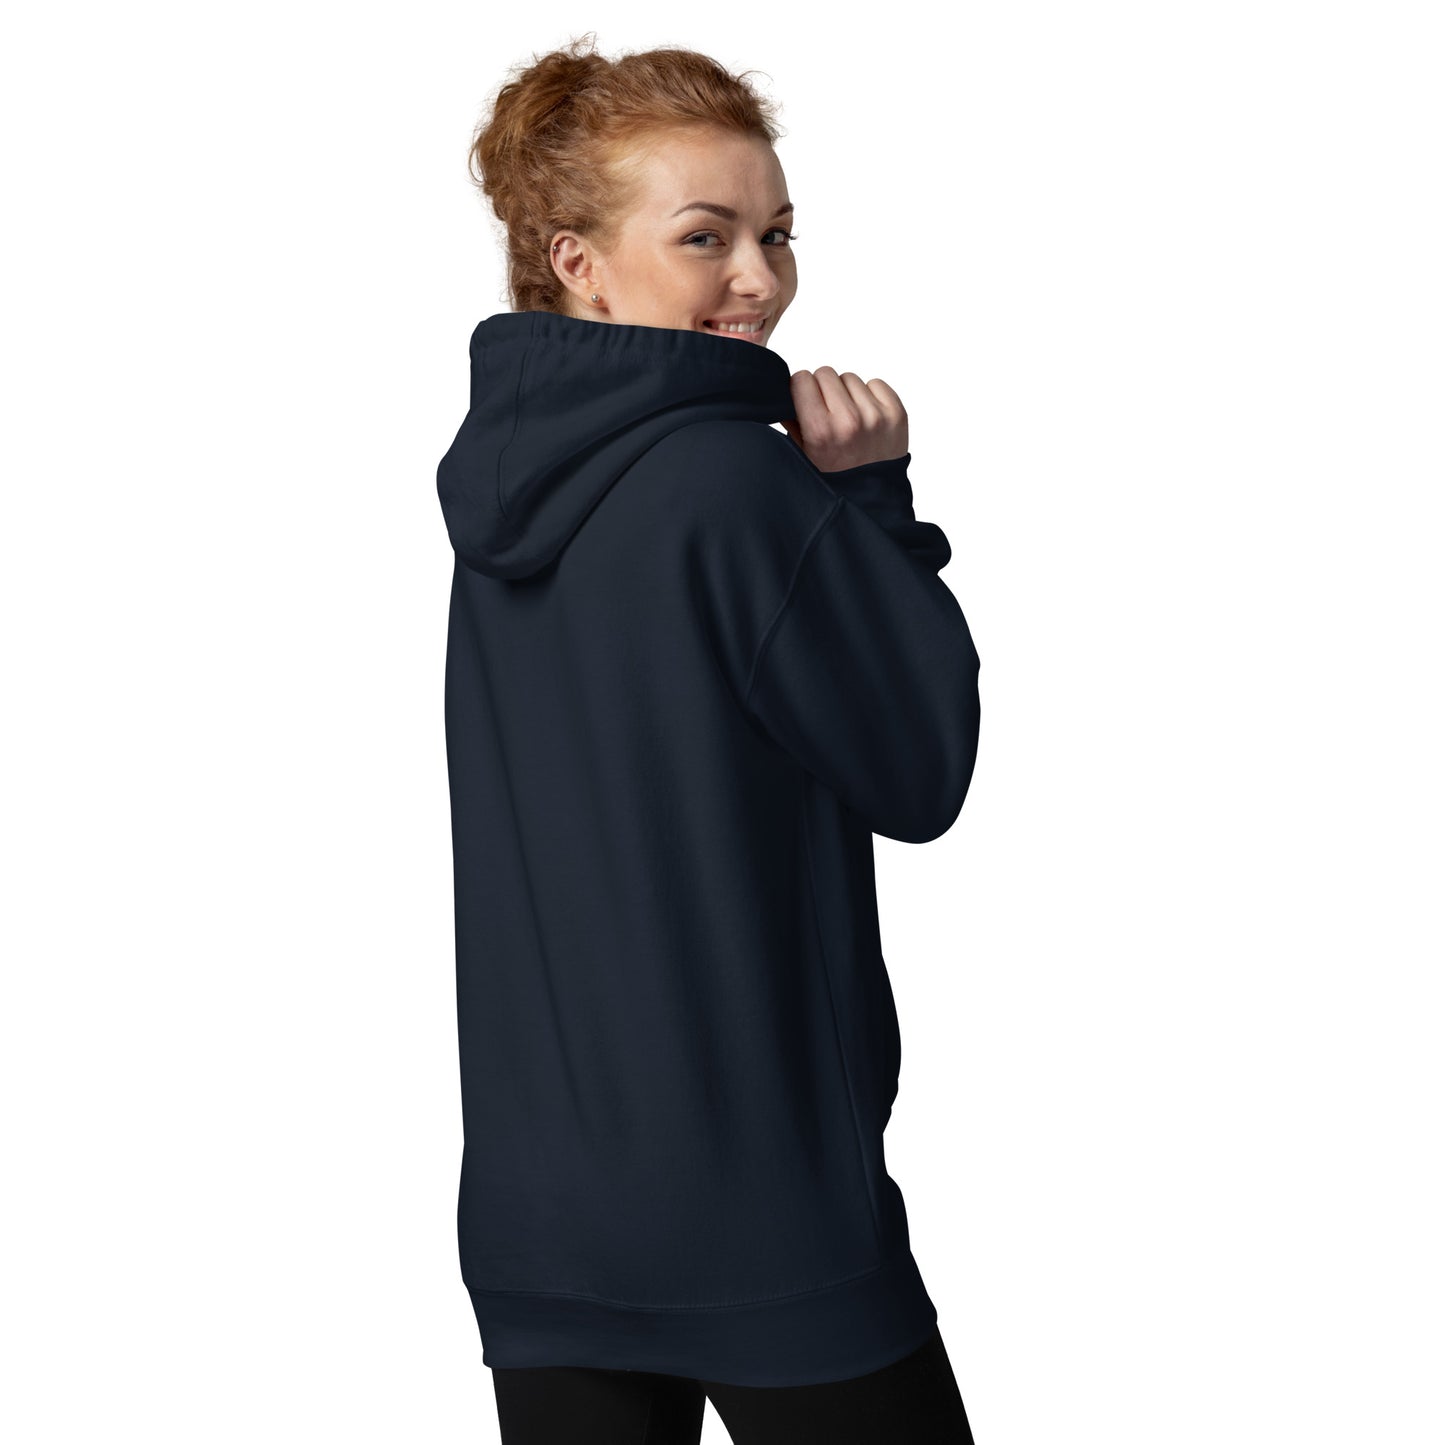 Back-Side view of Storm Castle Peak in Custer Gallatin National Forest Montana Navy Hoodies for Women from Park Attire